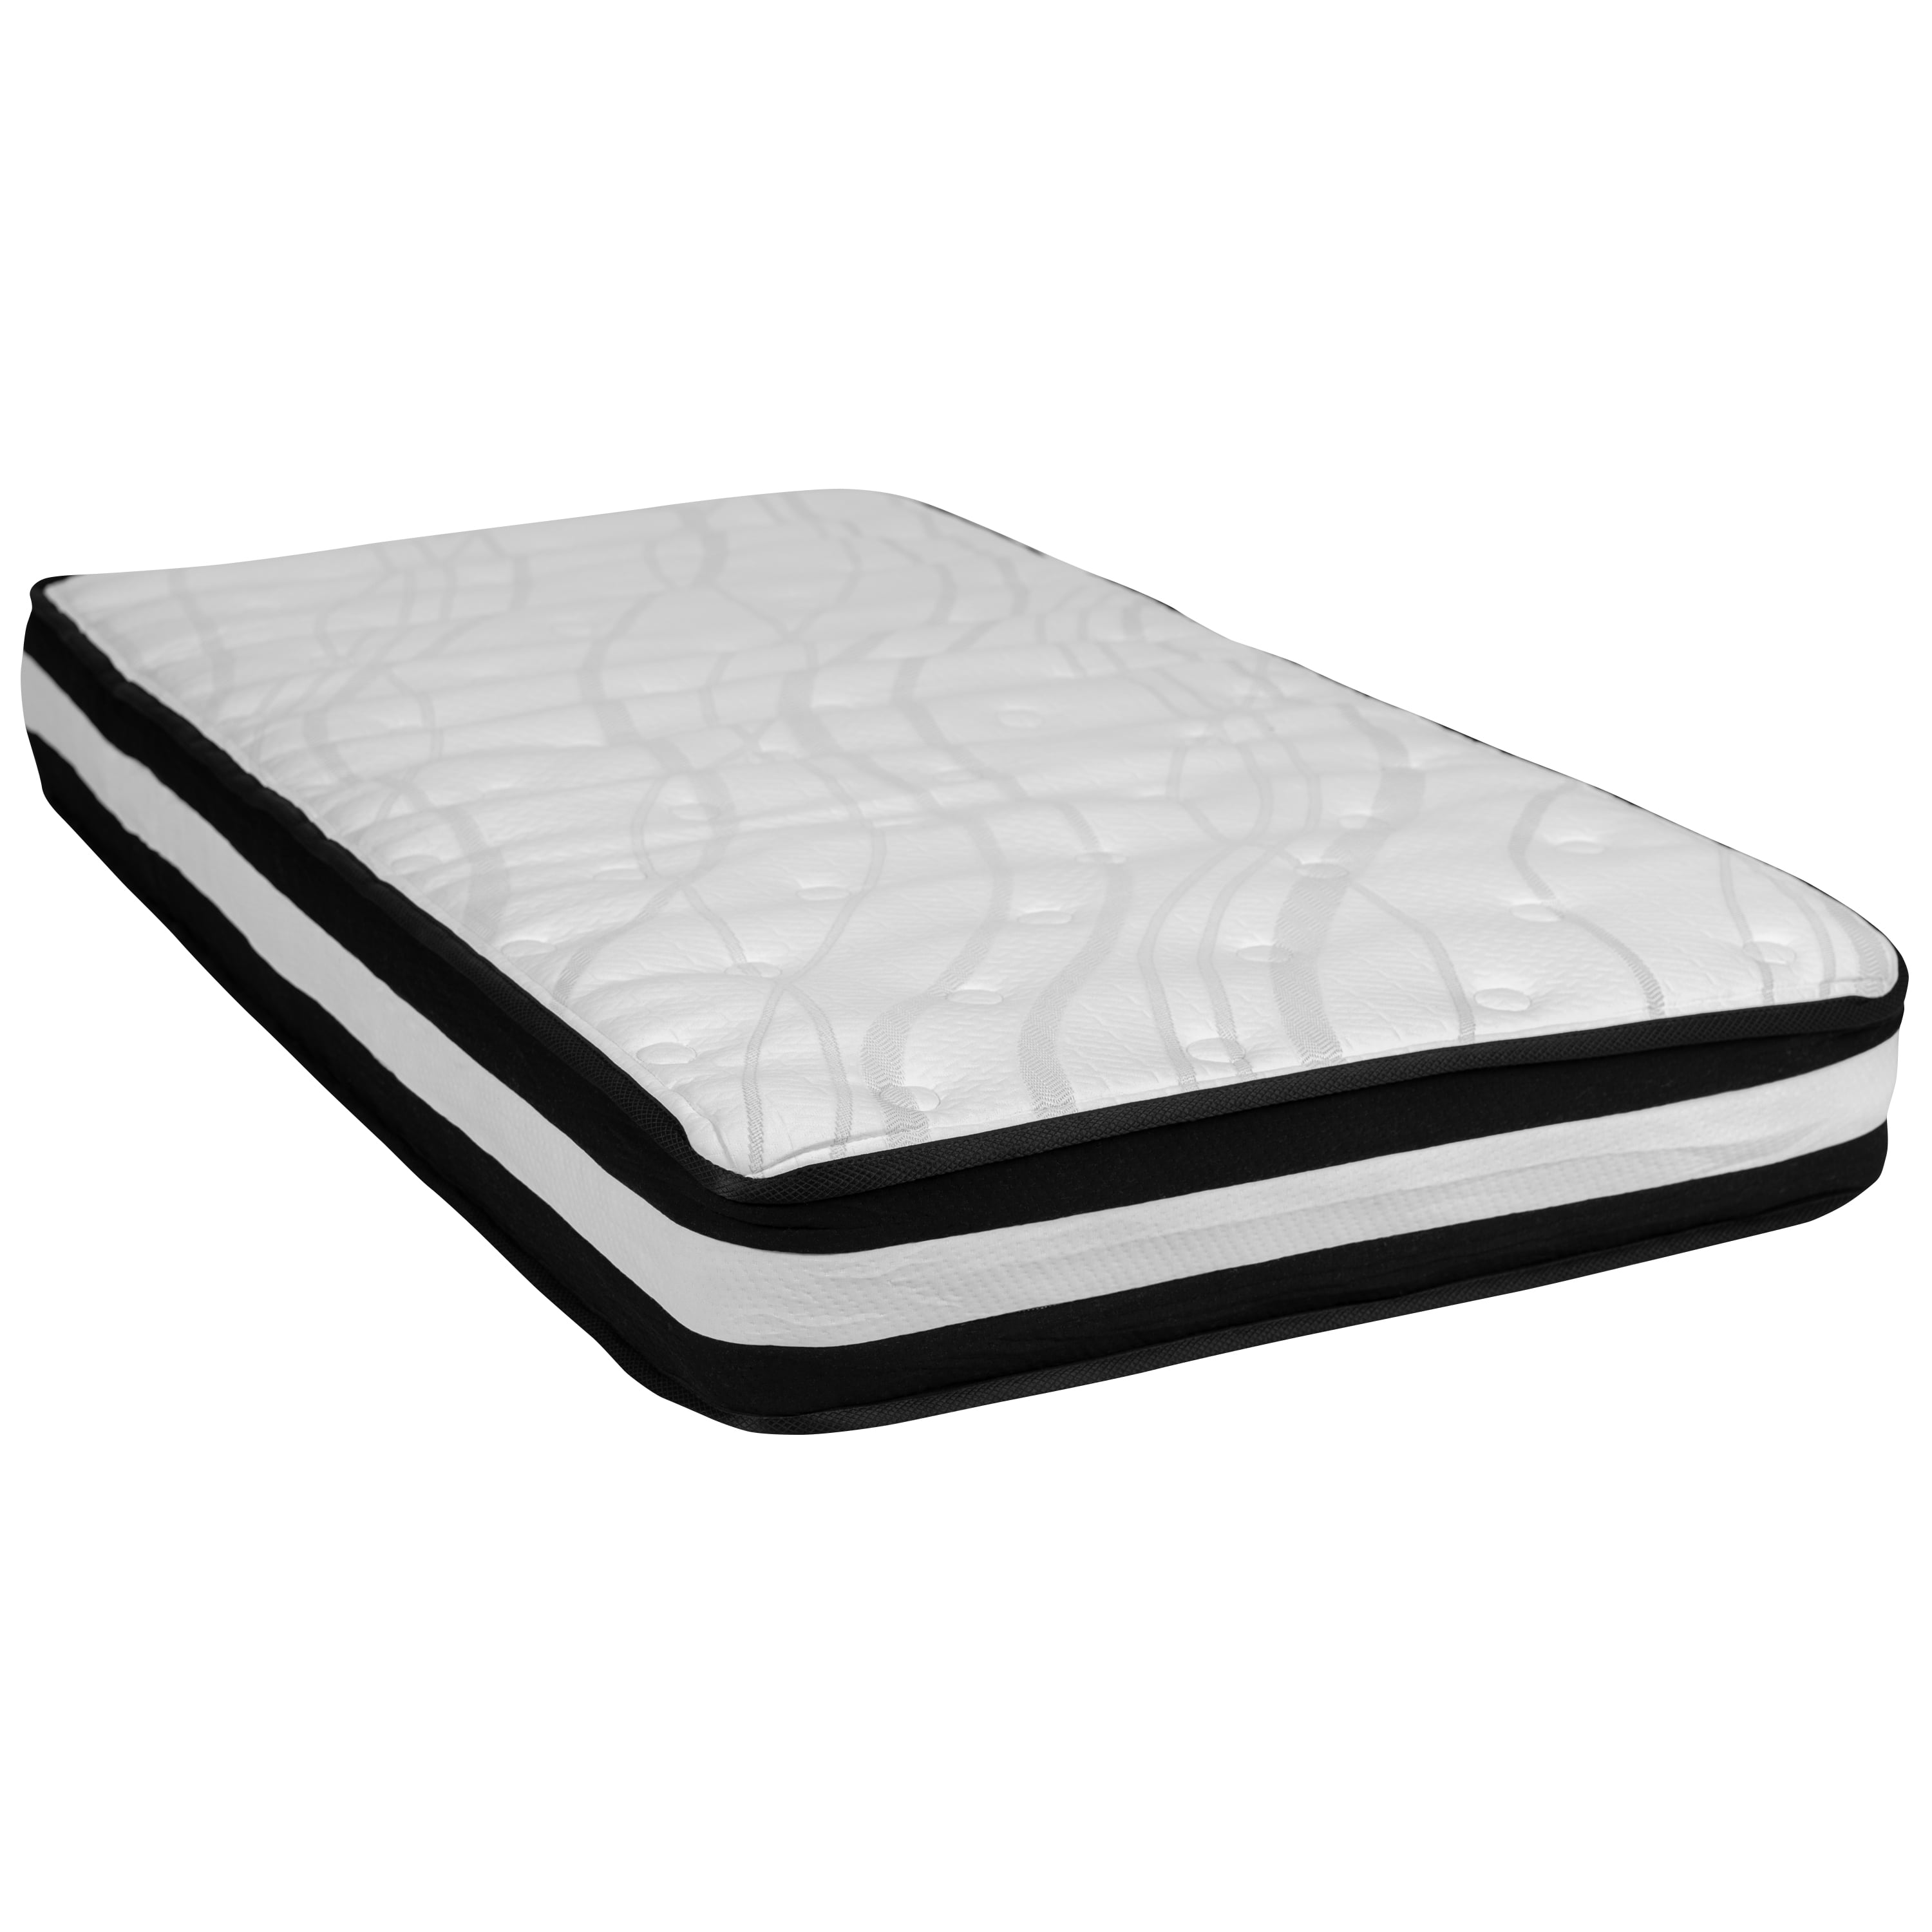 Memory Foam Mattress Comfort Polyester Quilted Tight Sleep 6 Inch Multiple Size 